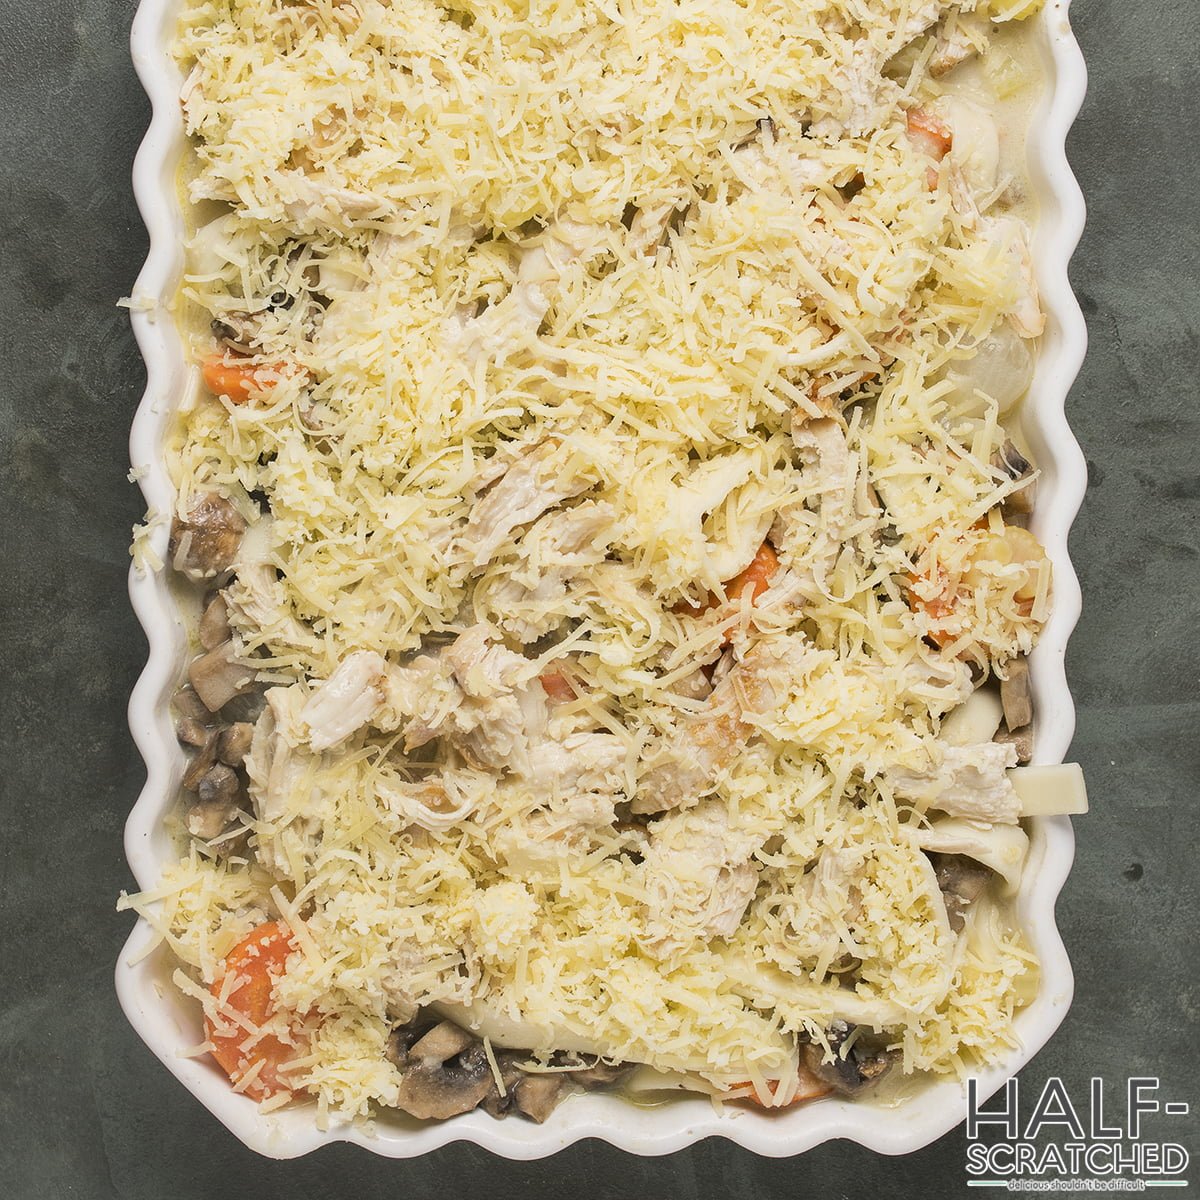 Parmesan cheese on chicken noodle casserole